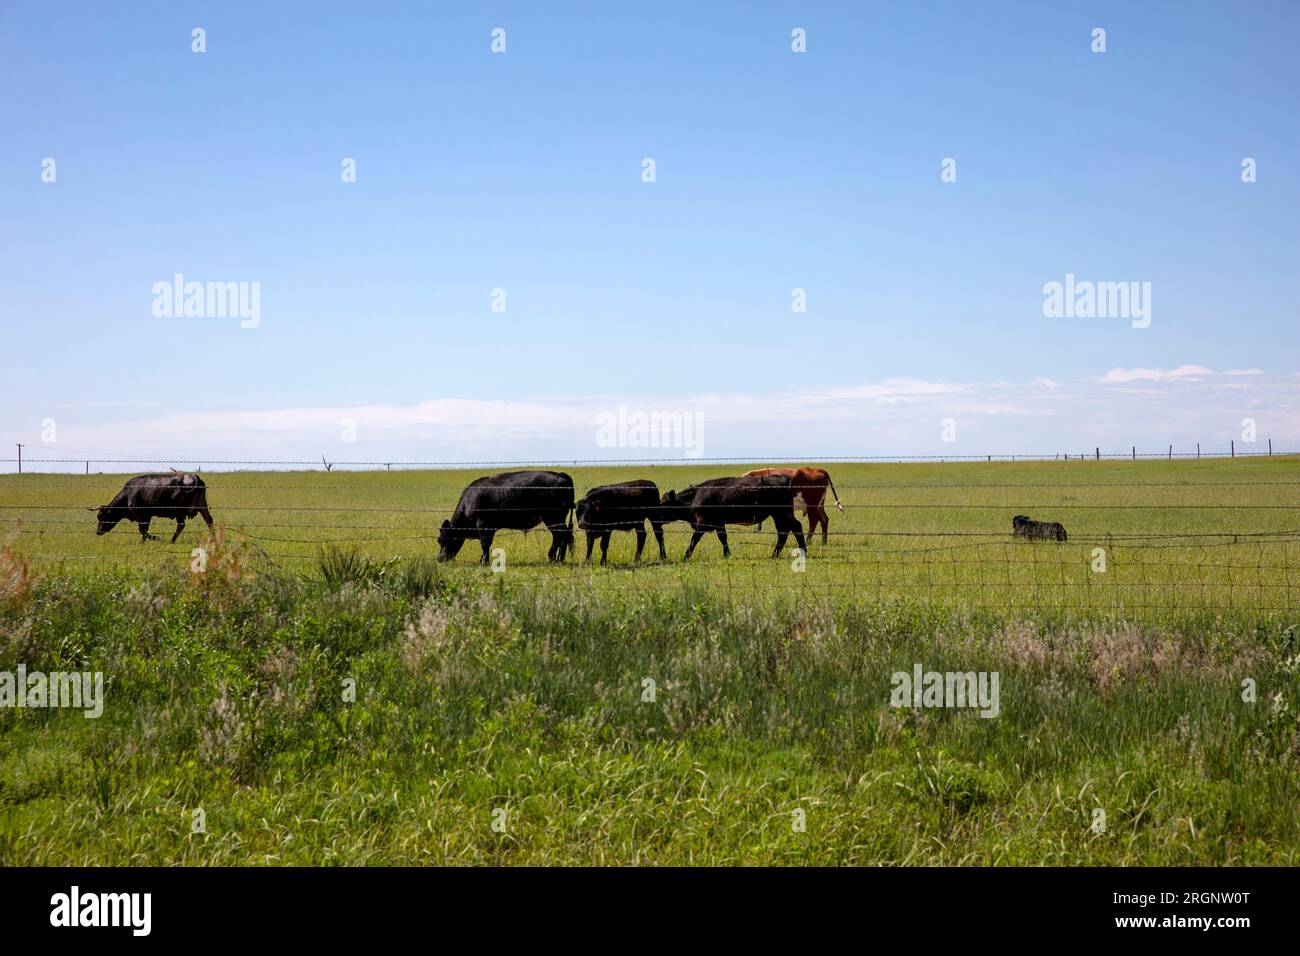 Texas, black angus cow herd in countryside, cattle in grazing, green field with fence, clear blue sky in sunny day background, bovine livestock in USA Stock Photo